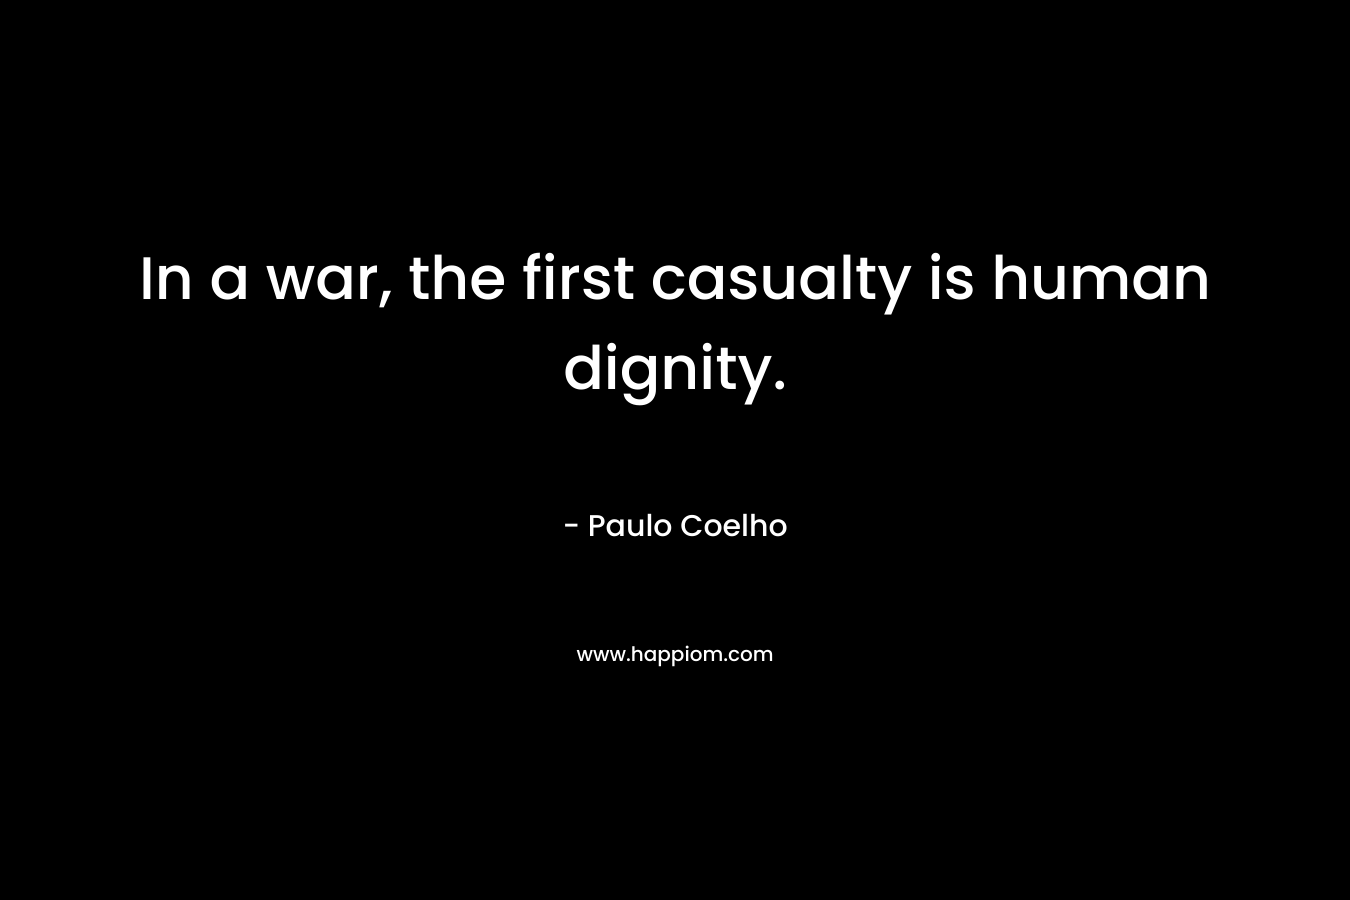 In a war, the first casualty is human dignity. – Paulo Coelho